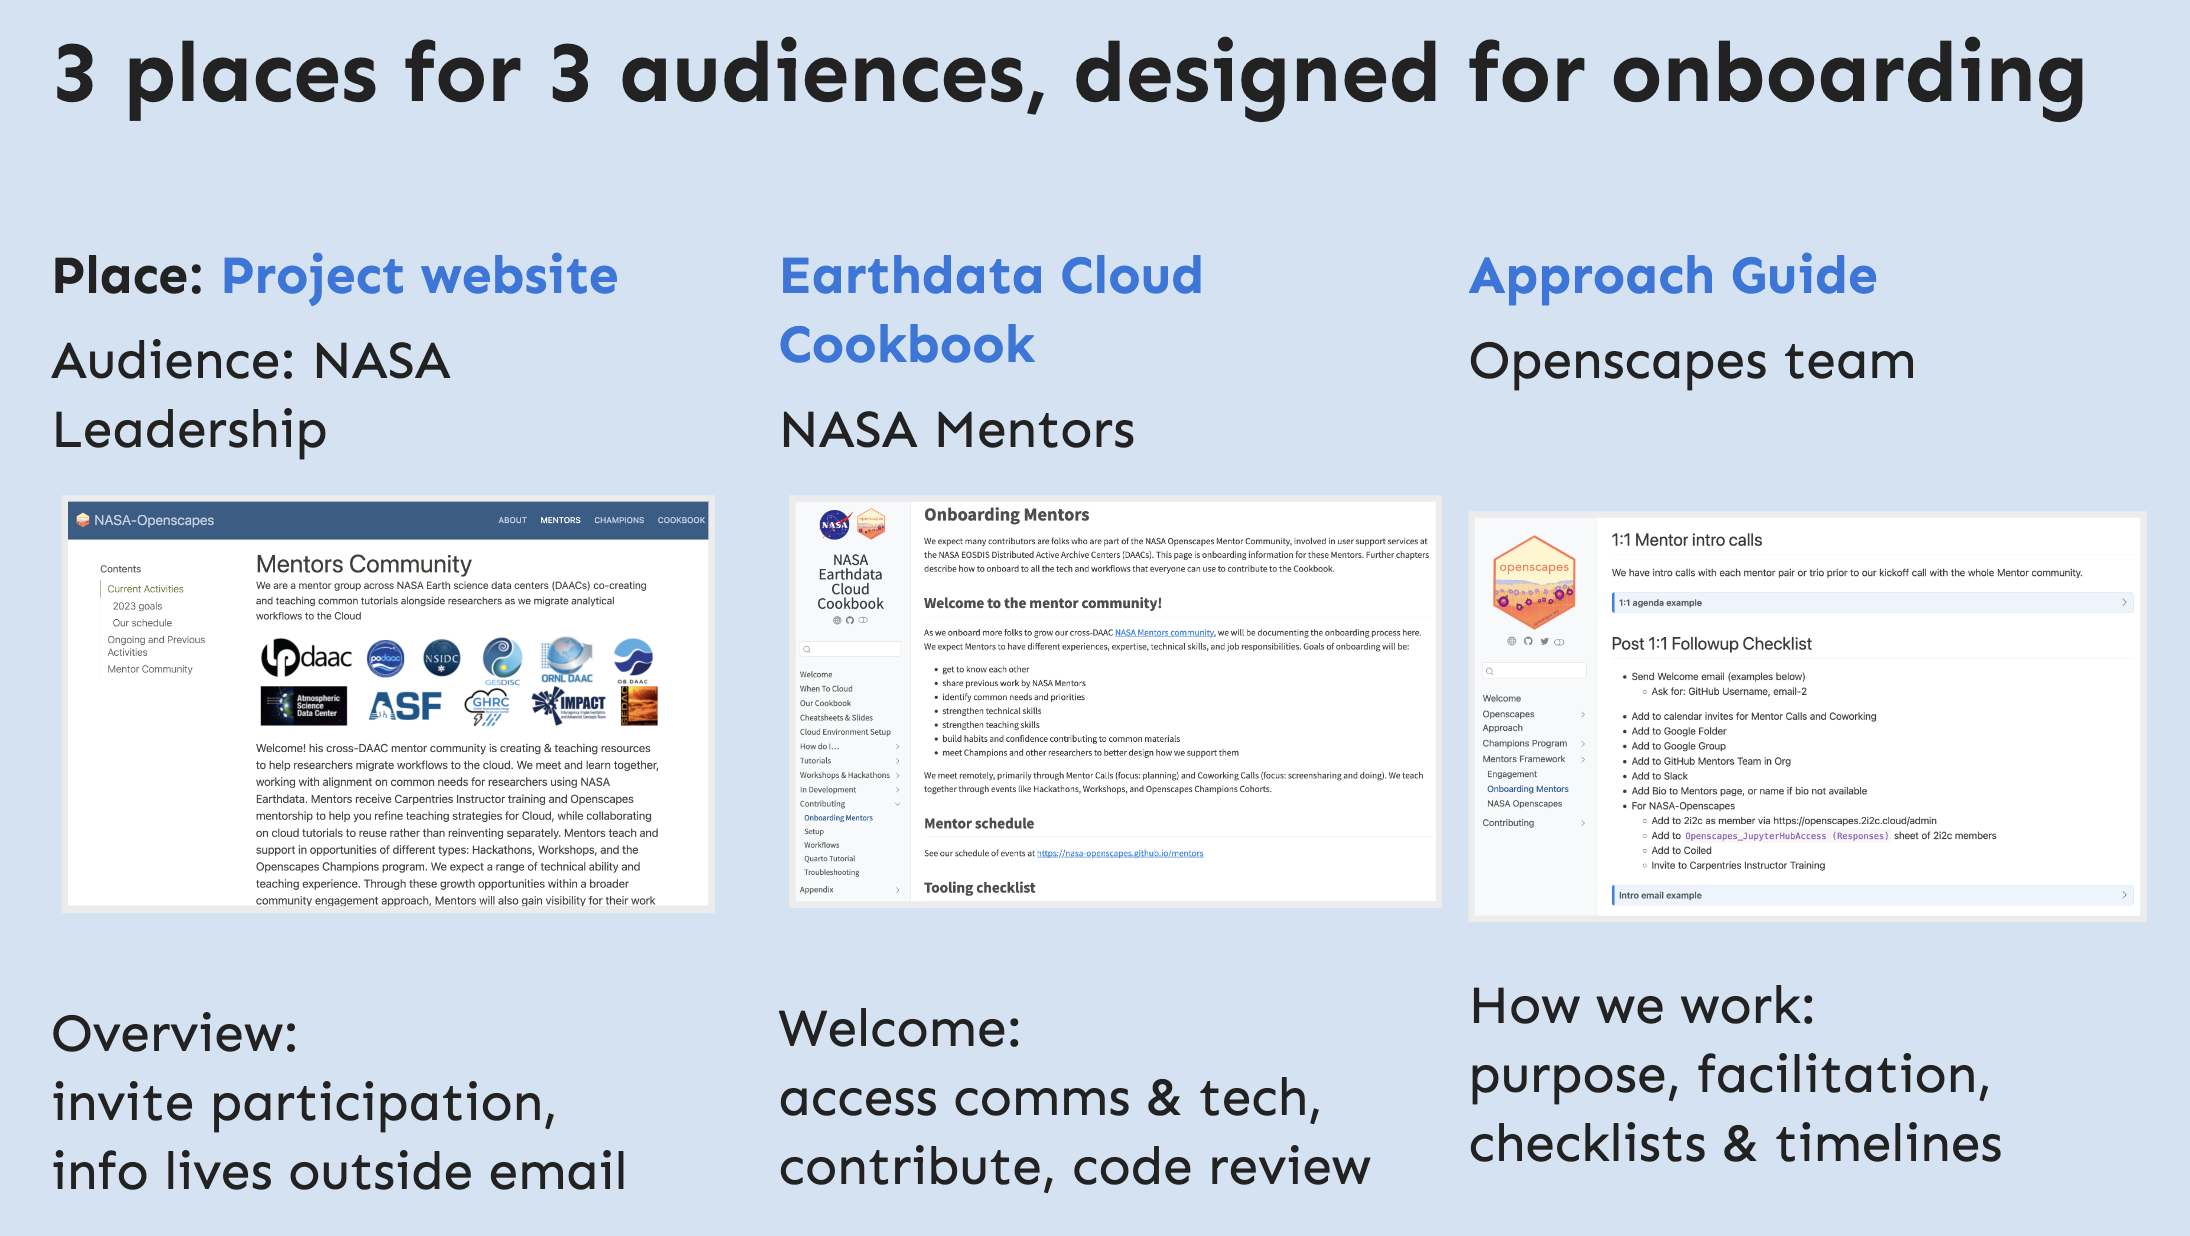 Screenshot of a slide that says 3 places for 3 audiences, designed for onboarding. There are 3 different quarto books, one is a project website with audience for NASA leadership; the Cookbook's audience is for Mentors; The Approach Guide is for the Openscapes Team.